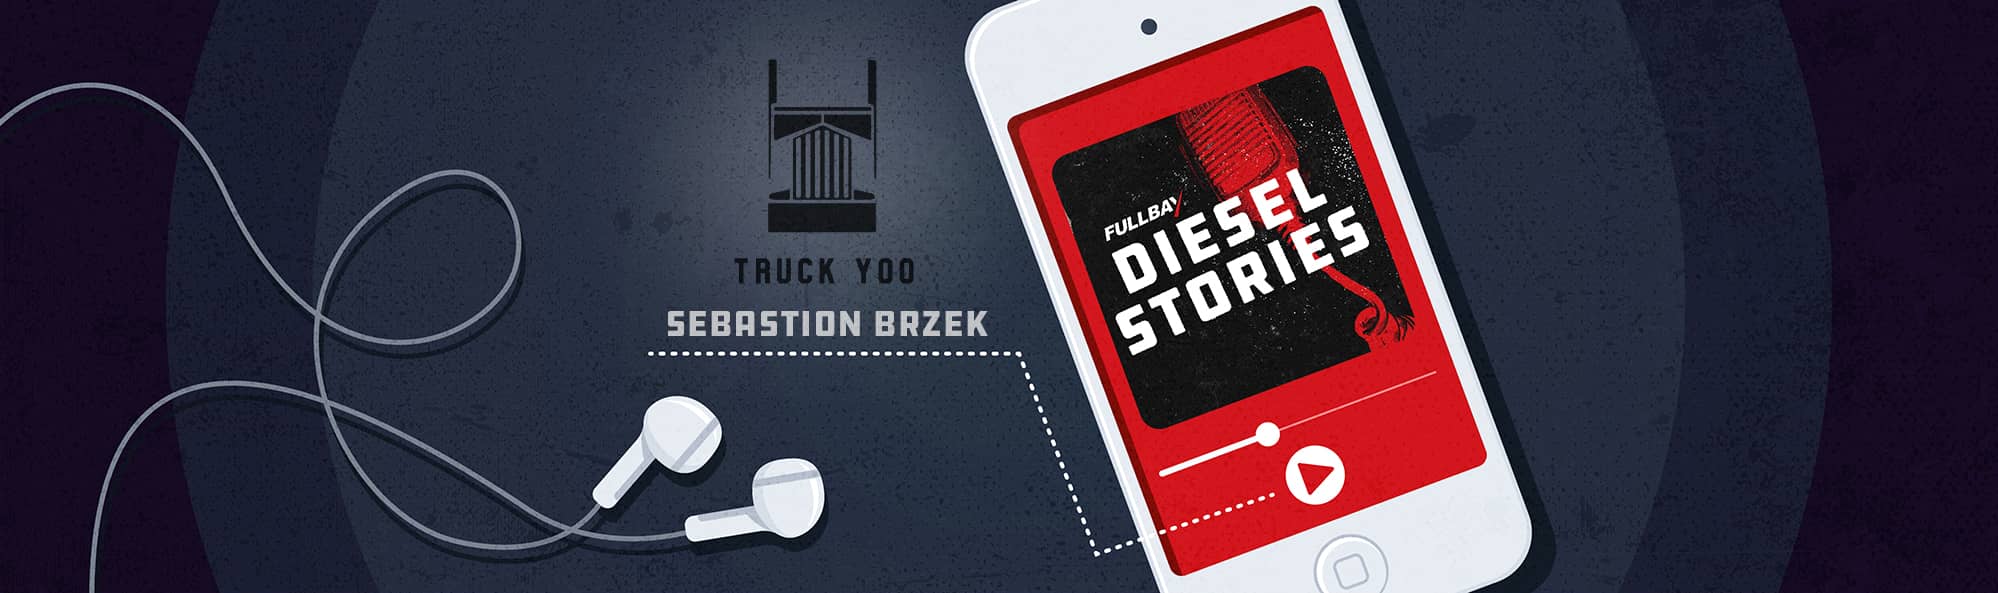 Diesel Stories Podcast Recap: Truck Yoo and Running a Biz as an Owner-Operator